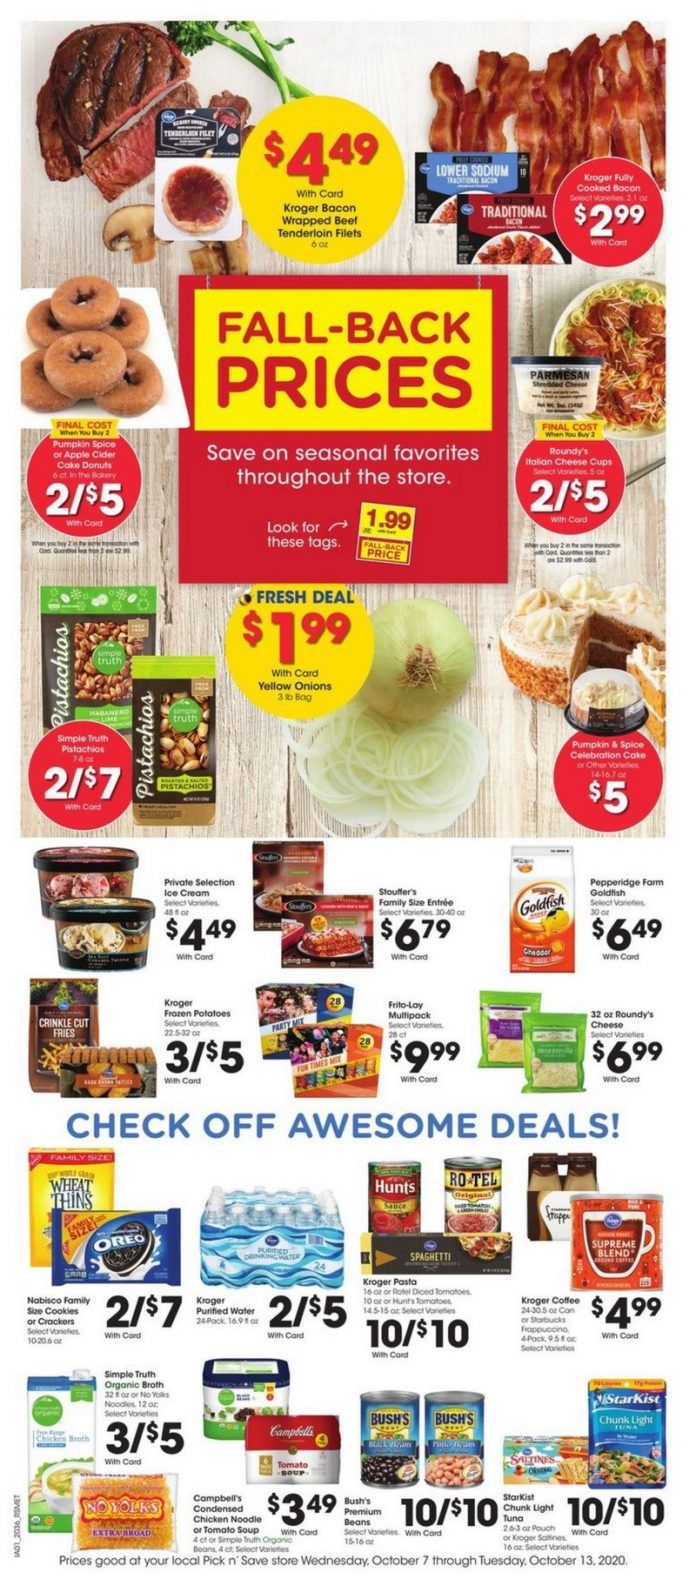 Pick 'n Save Weekly Ad Oct 07 Oct 13, 2020